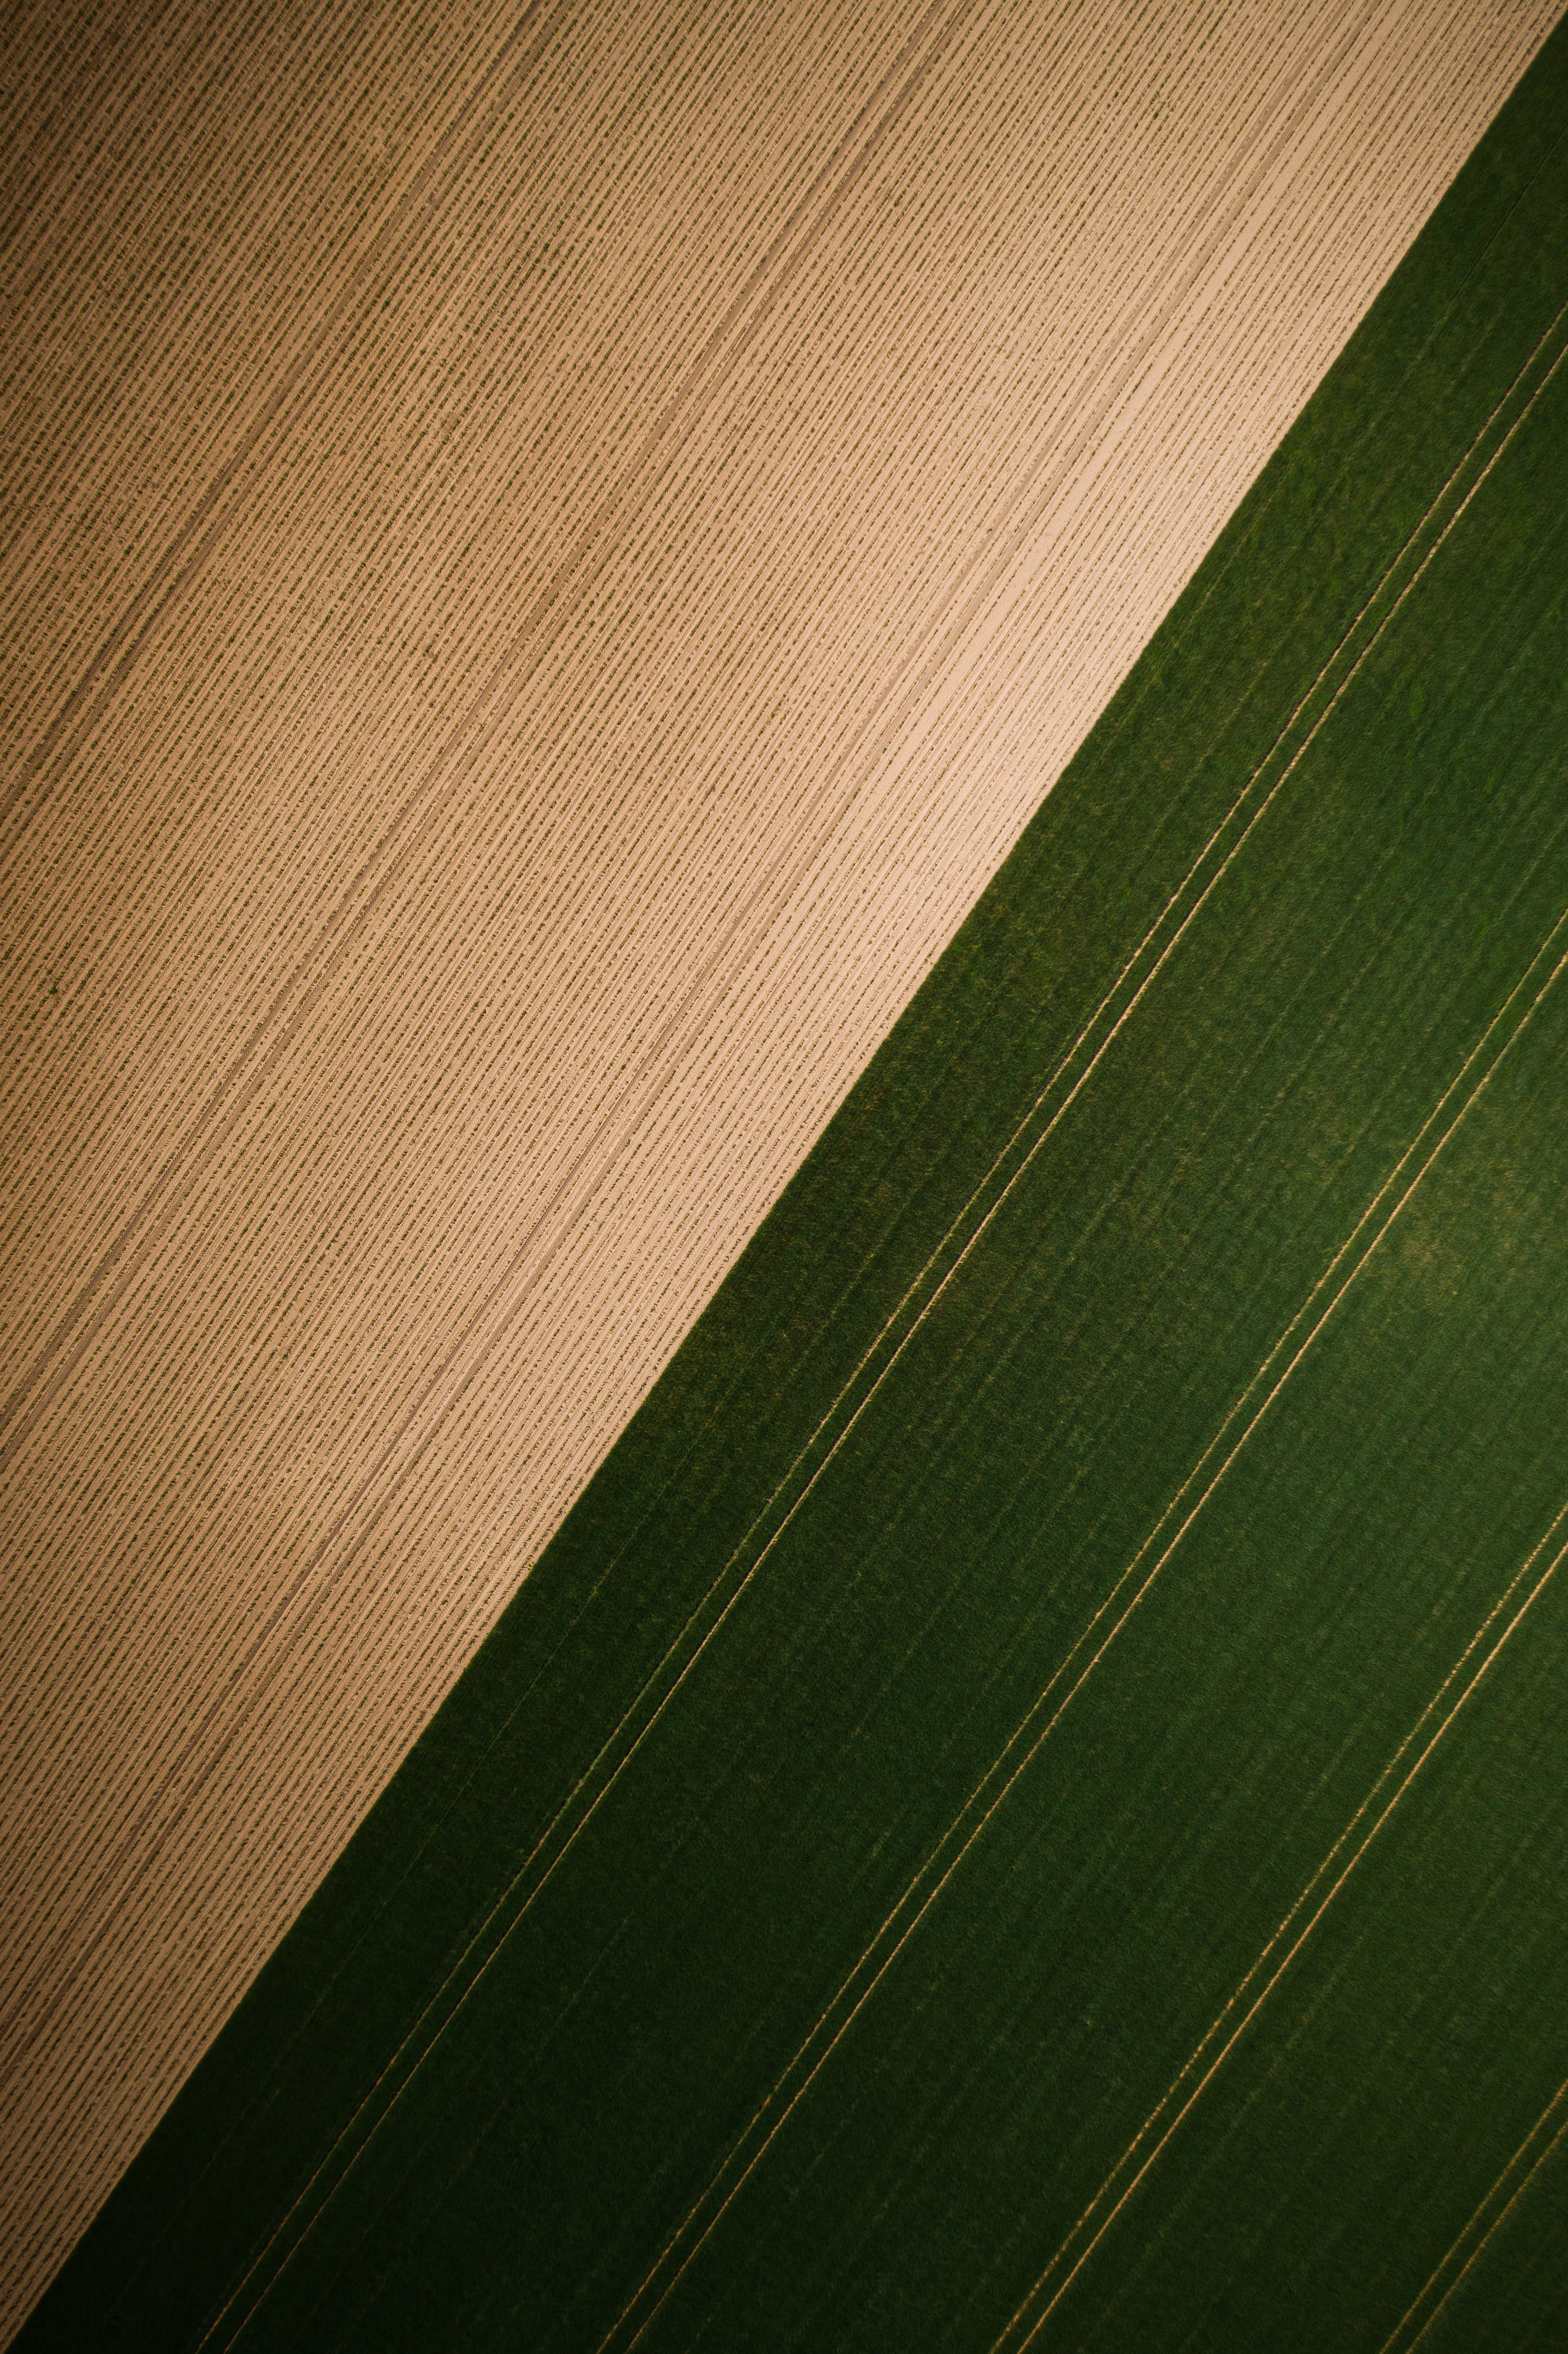 stripes, grass, view from above, texture, textures, field, streaks Aesthetic wallpaper